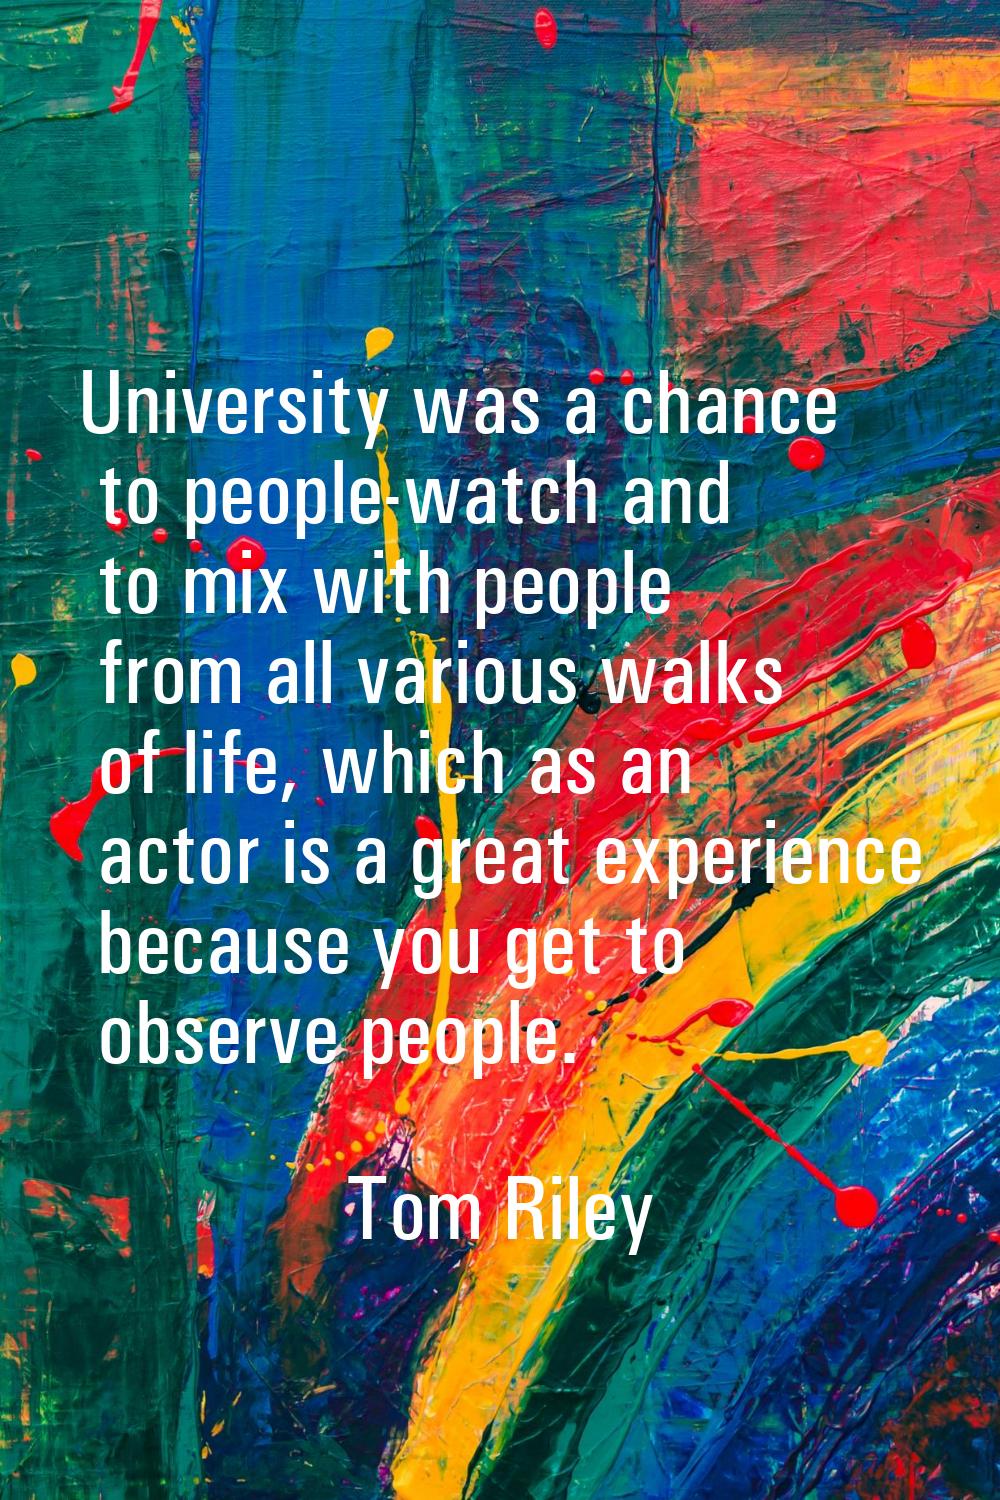 University was a chance to people-watch and to mix with people from all various walks of life, whic